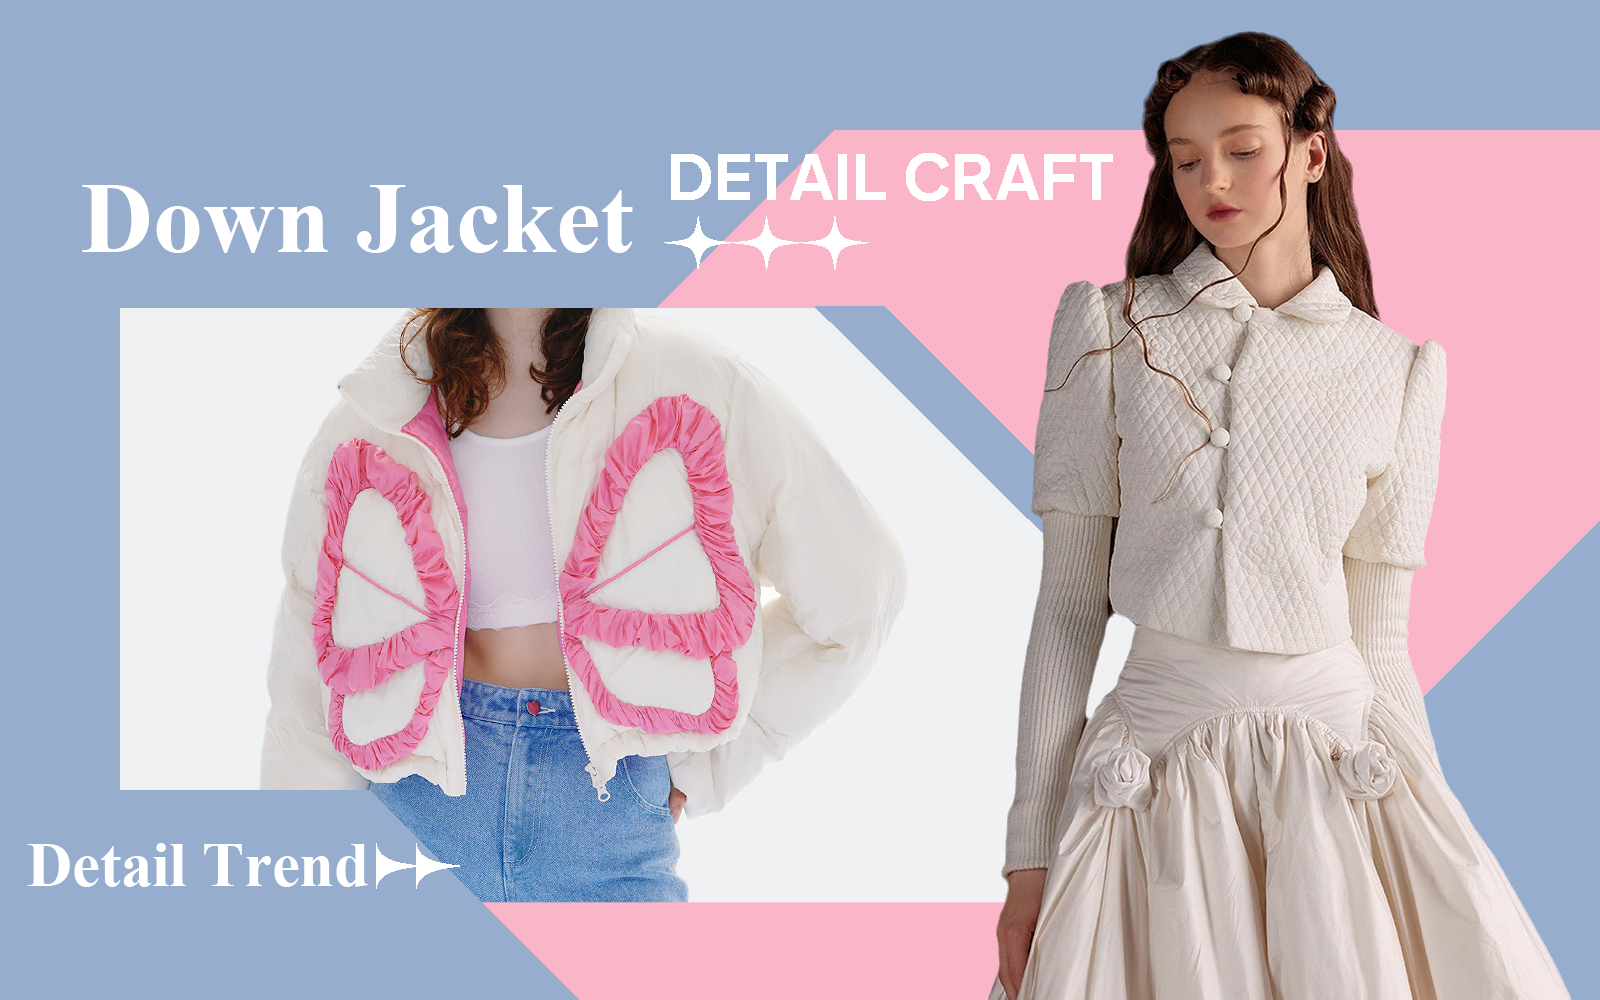 The Quilting Craft Trend for Women's Down Jacket